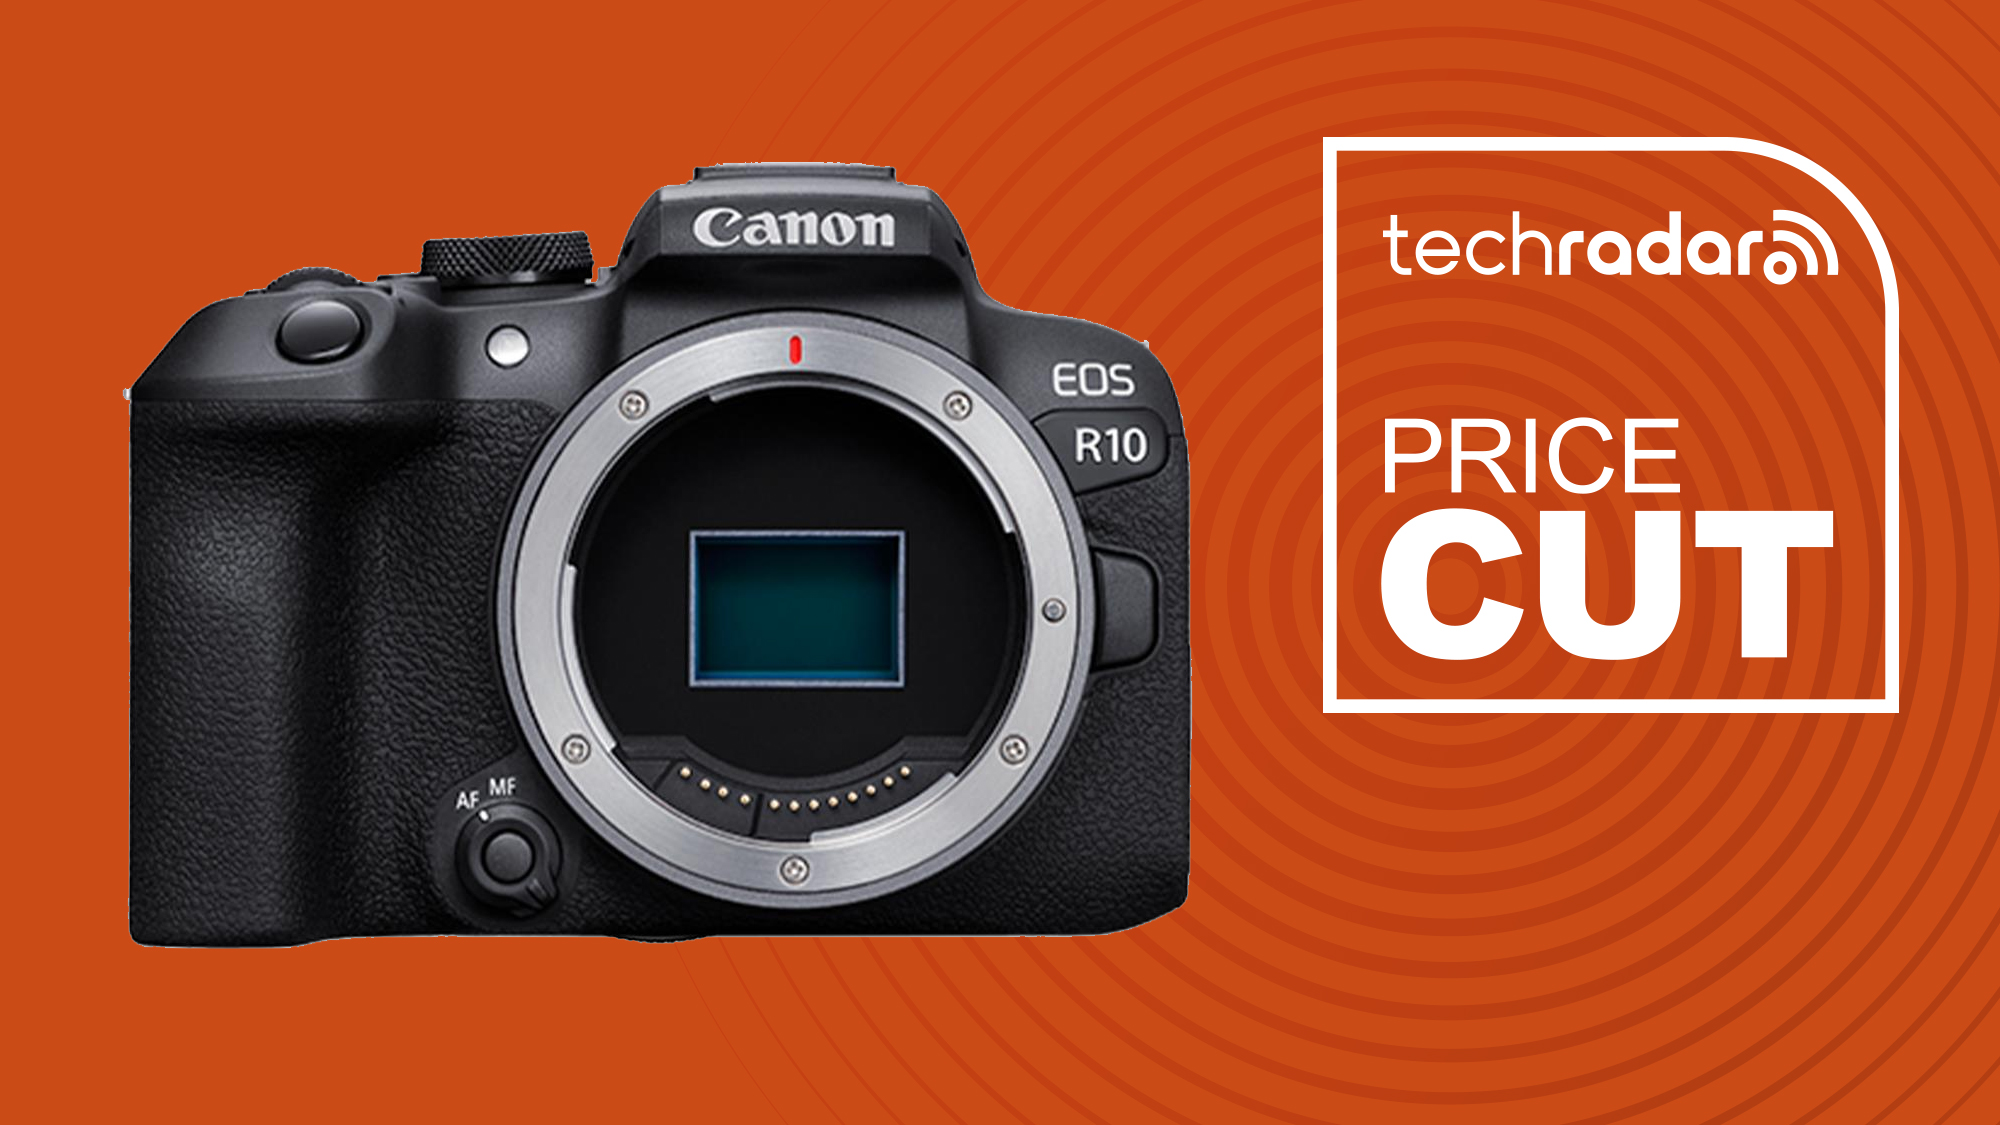 Canon's best camera for beginners is going cheap right now